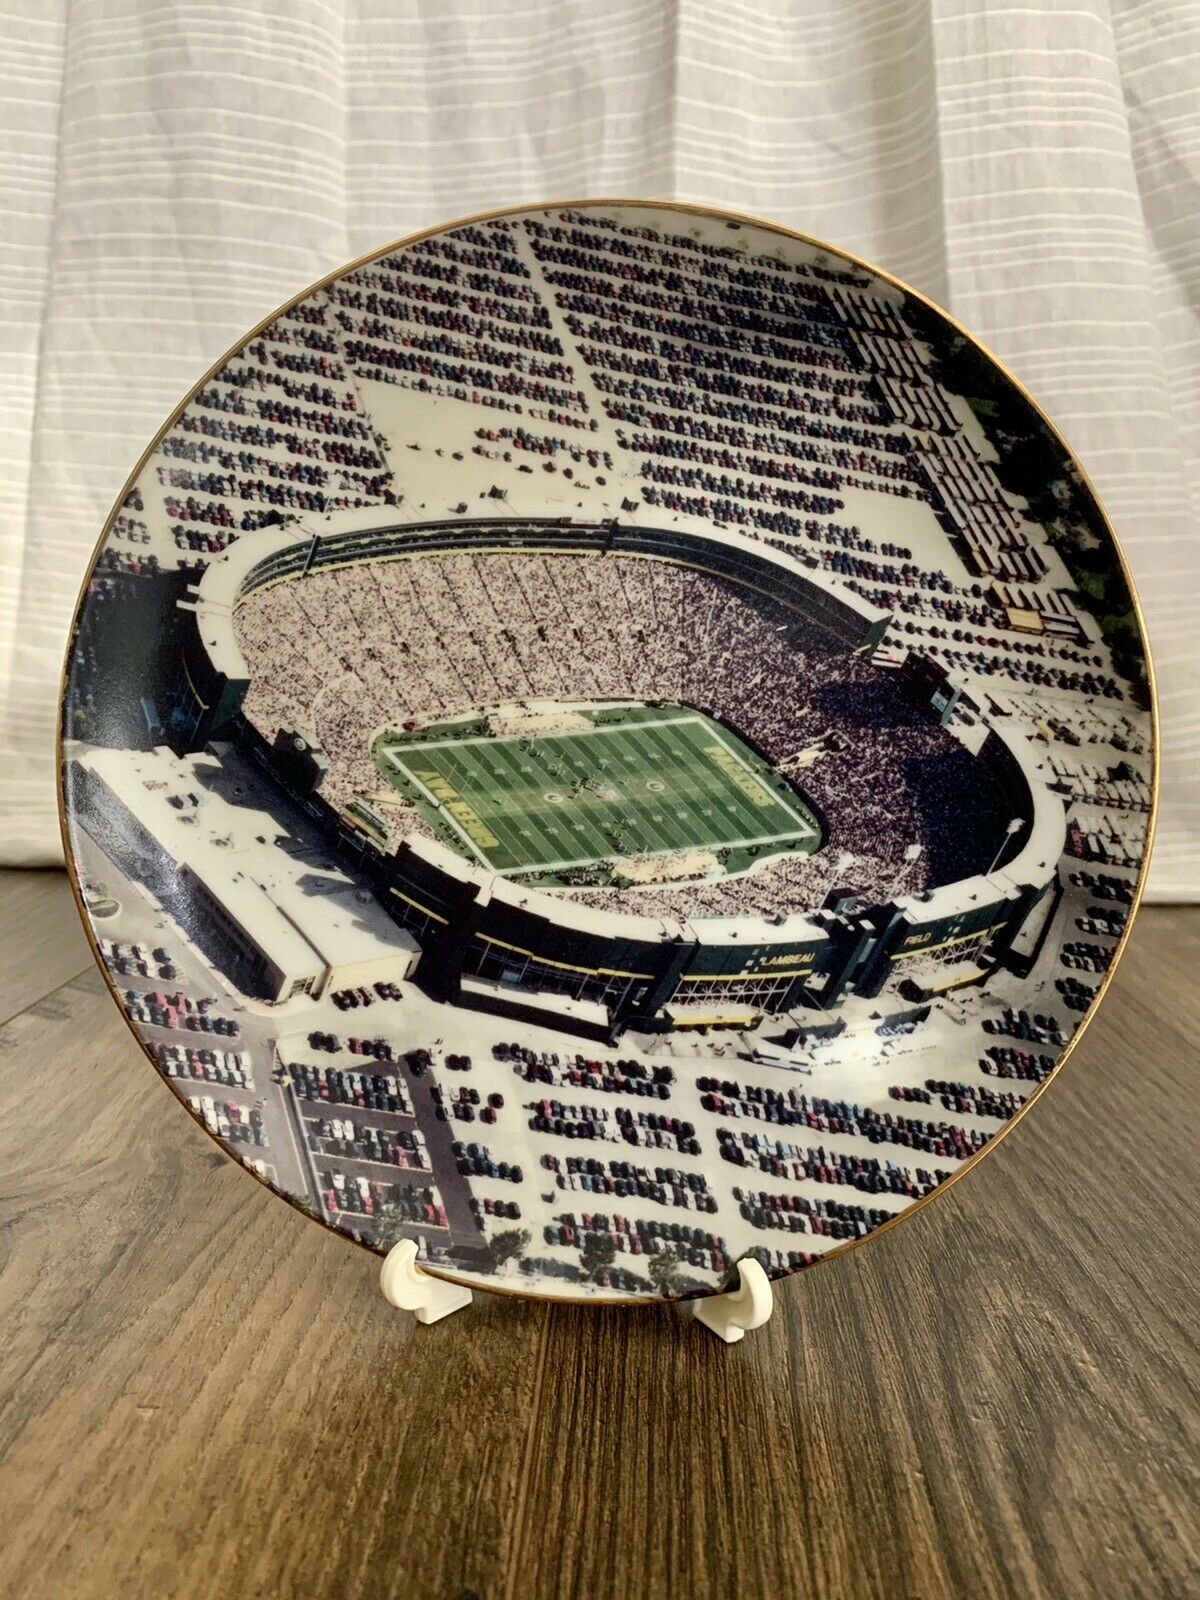 Limited Edition 1995 Green Bay Packers Historic Lambeau Field Collectors Plate!